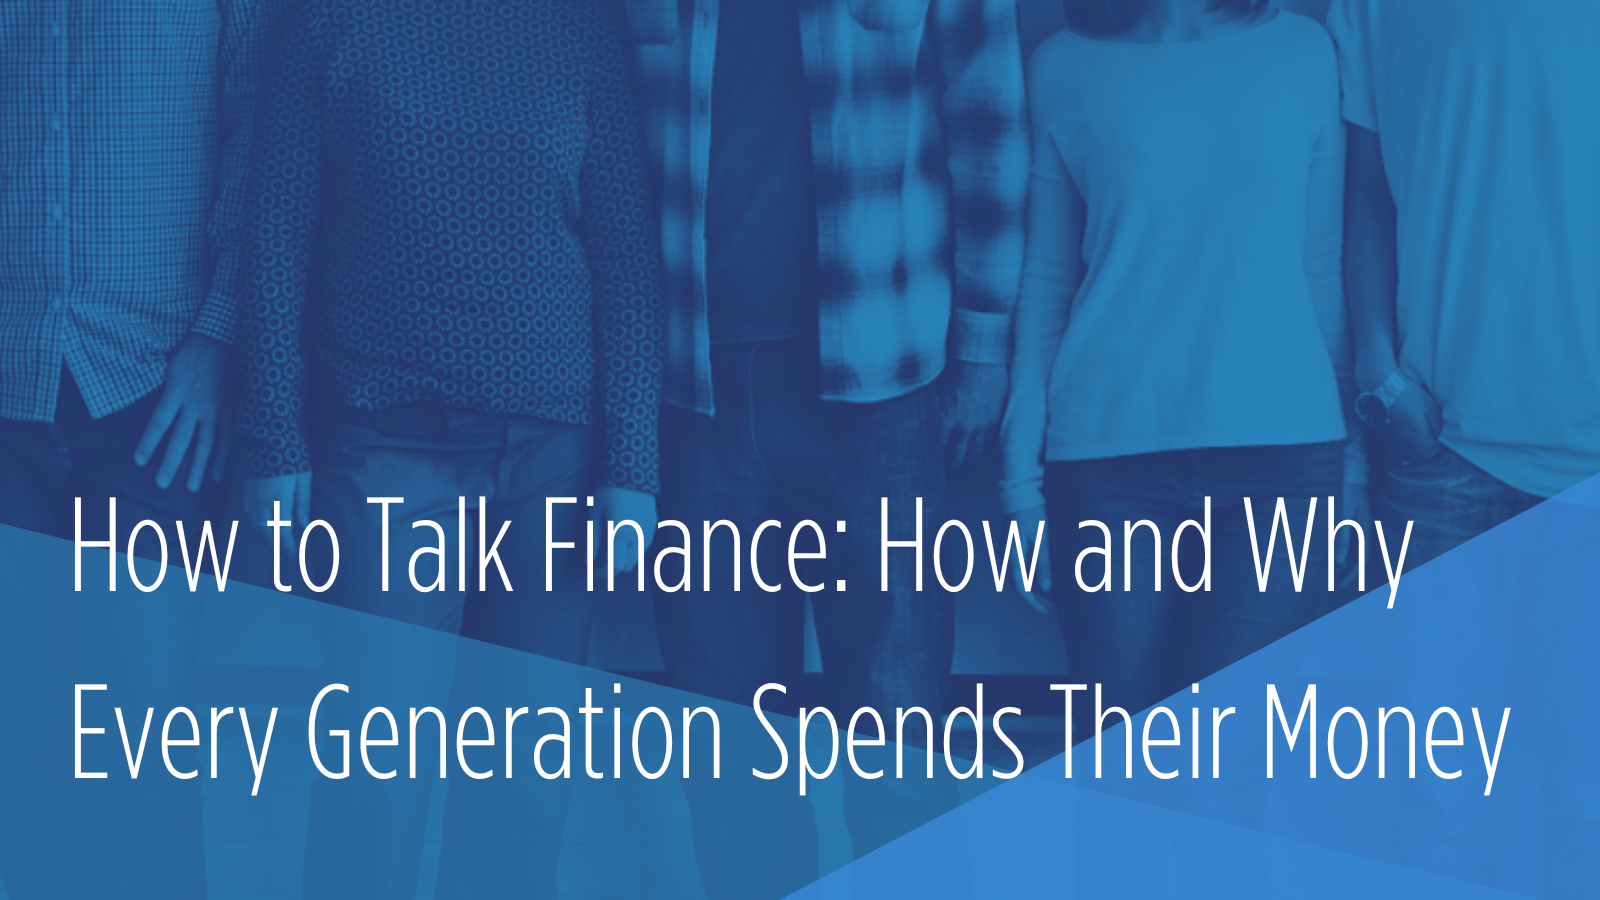 Five people standing side by side wearing casual clothing, with text reading, "How to Talk Finance: How and Why Every Generation Spends Their Money".